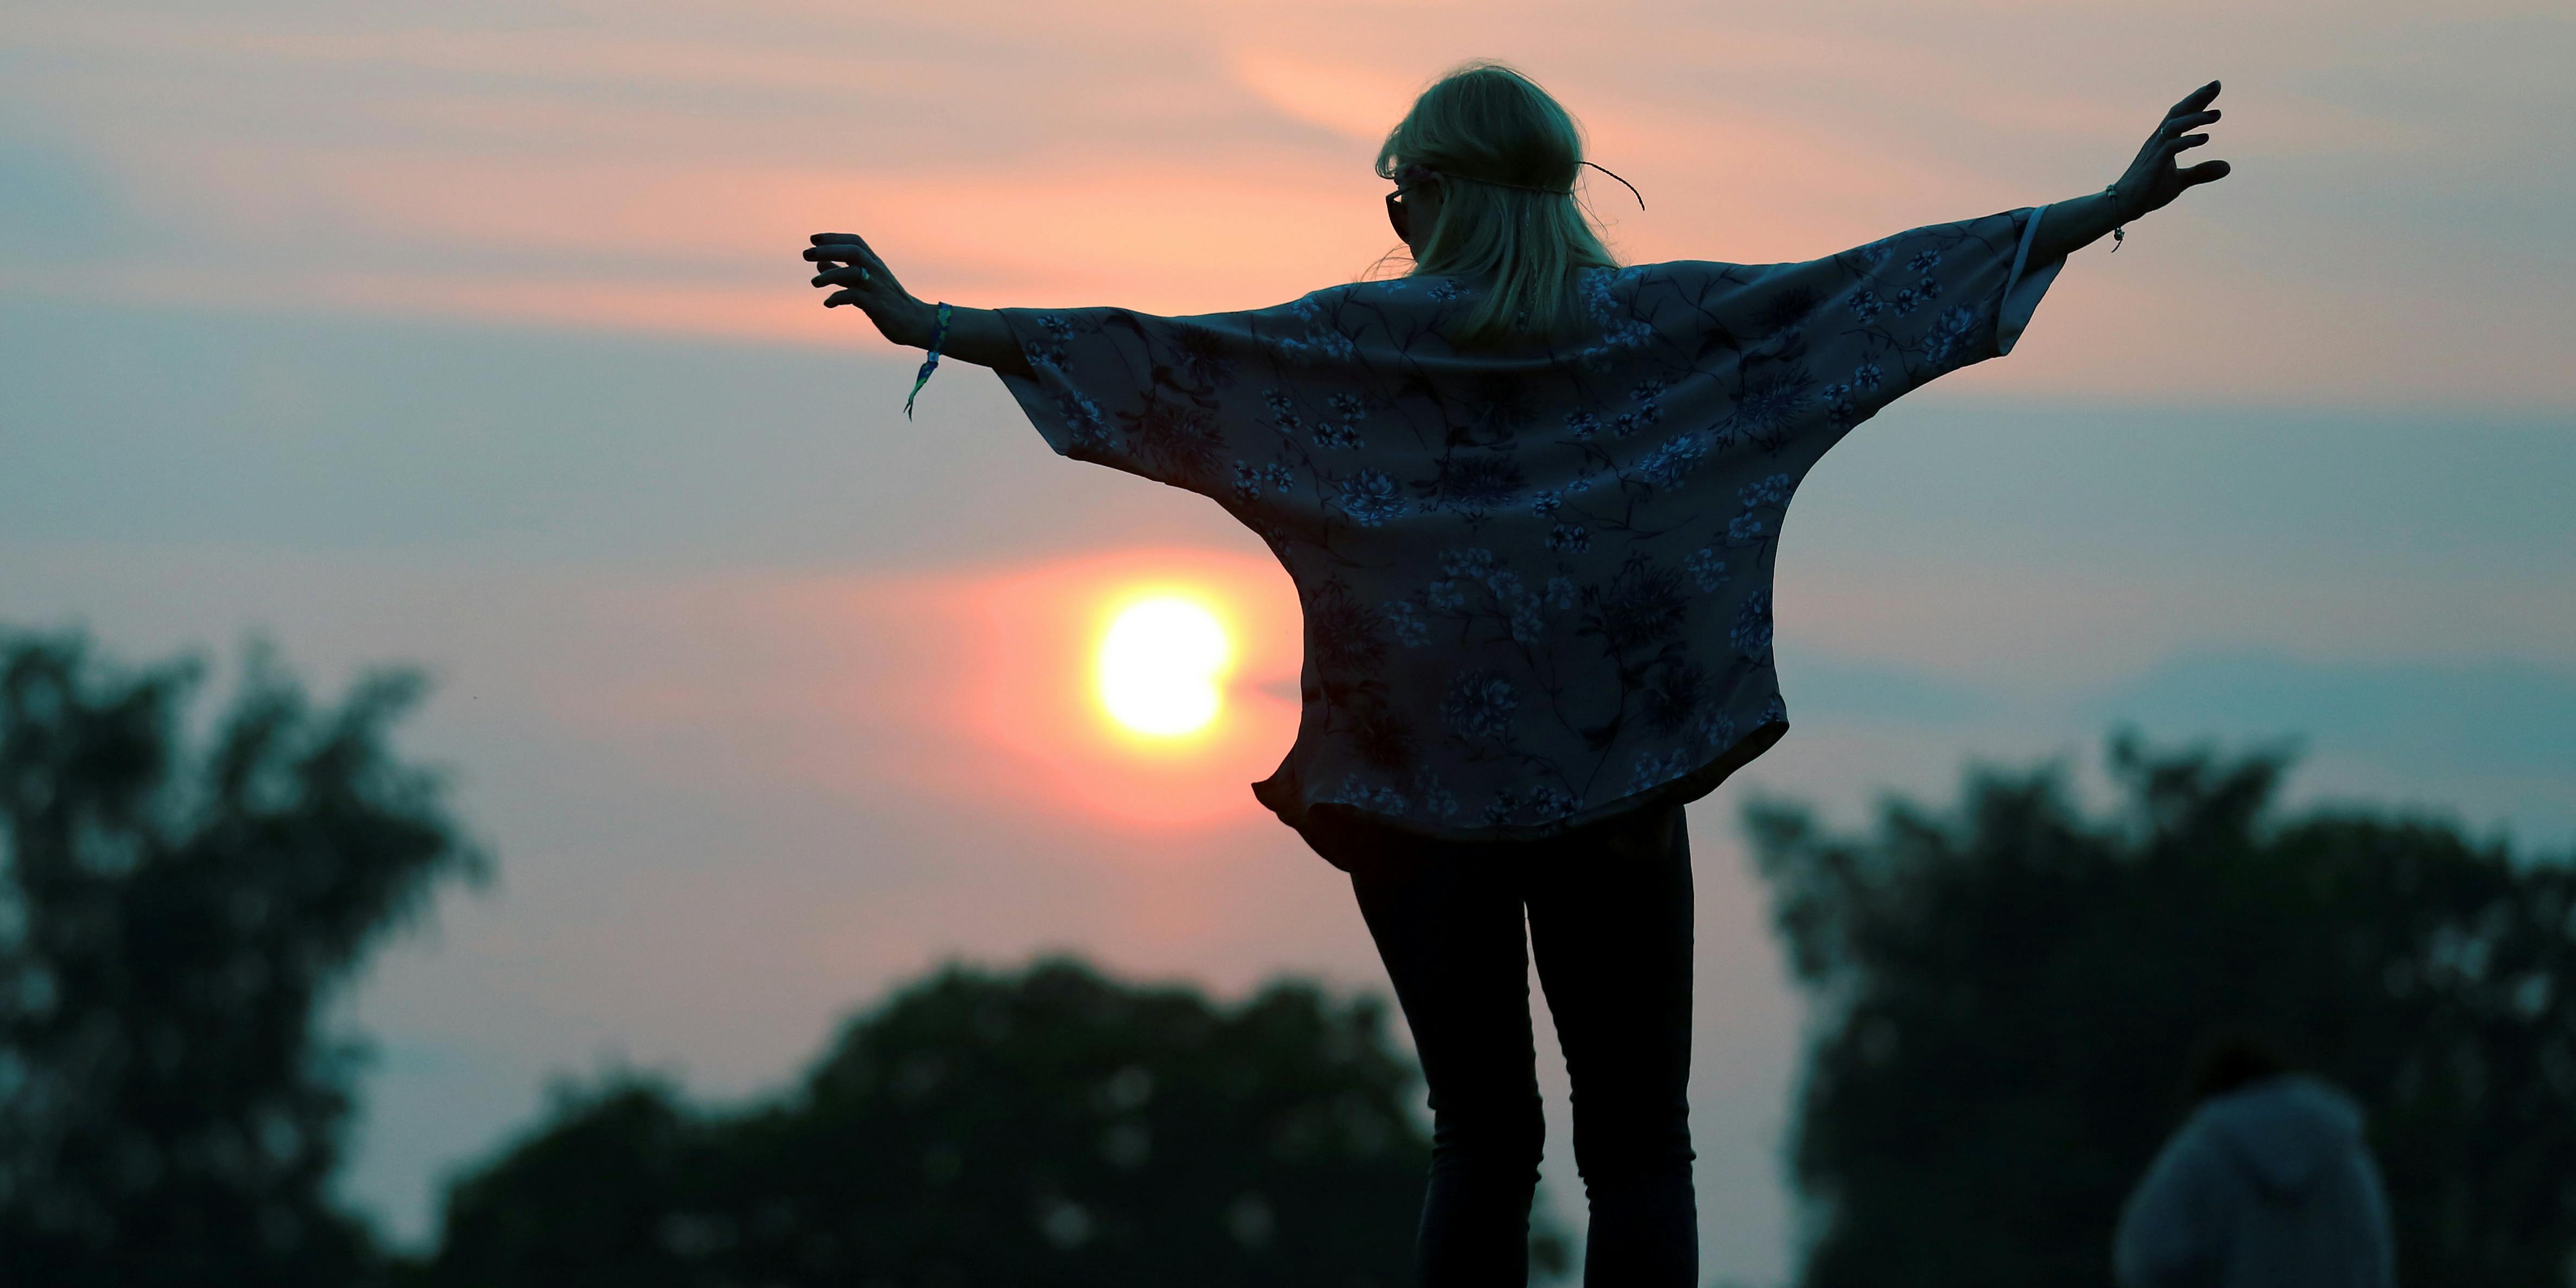 GLASTONBURY, ENGLAND - JUNE 26: A woman stands on a rock at the stone circle as people gather for sunset at the Glastonbury Festival of Contemporary Performing Arts site at Worthy Farm, Pilton on June 26, 2013 near Glastonbury, England. Northern Nights in the Emerald Triangle just announced major discounts for attendees who buy the local weed